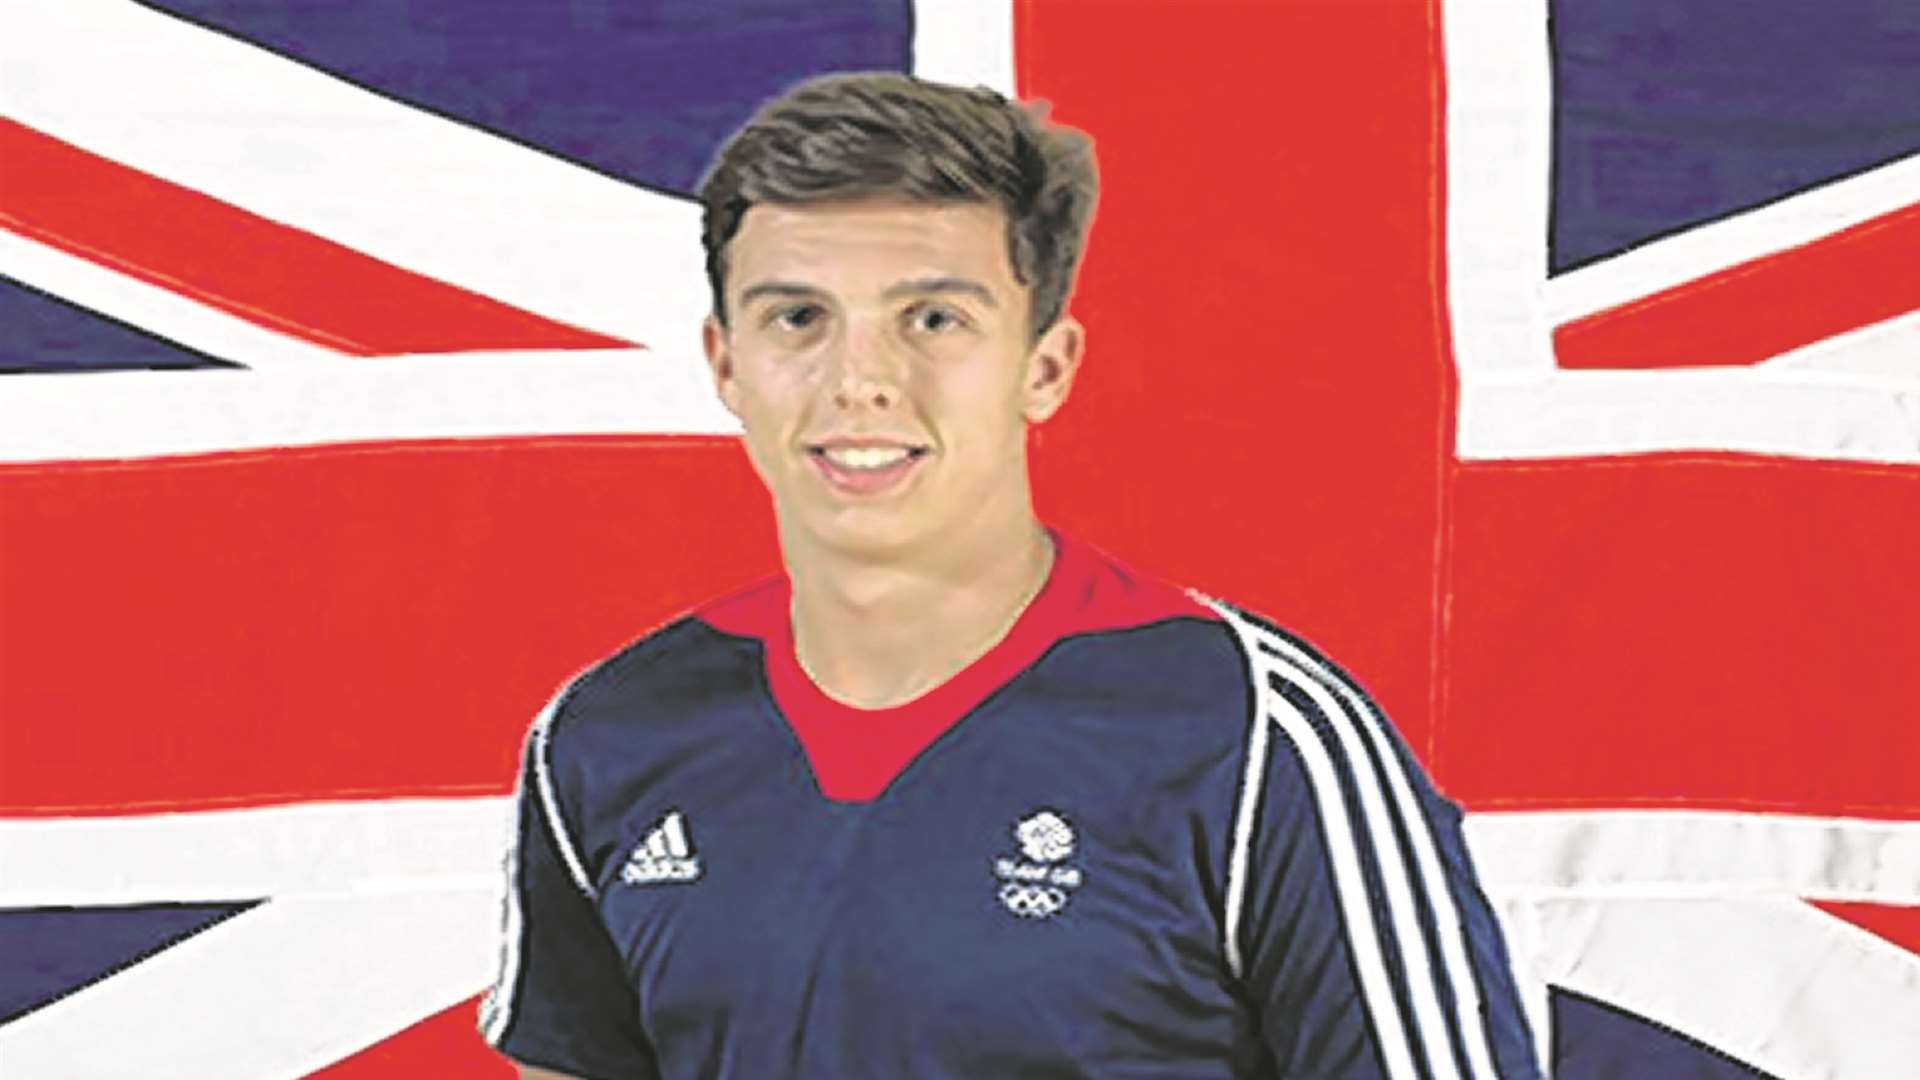 Jamie O'Connor has been awarded the funding after being selected for the GB swimming sqaud